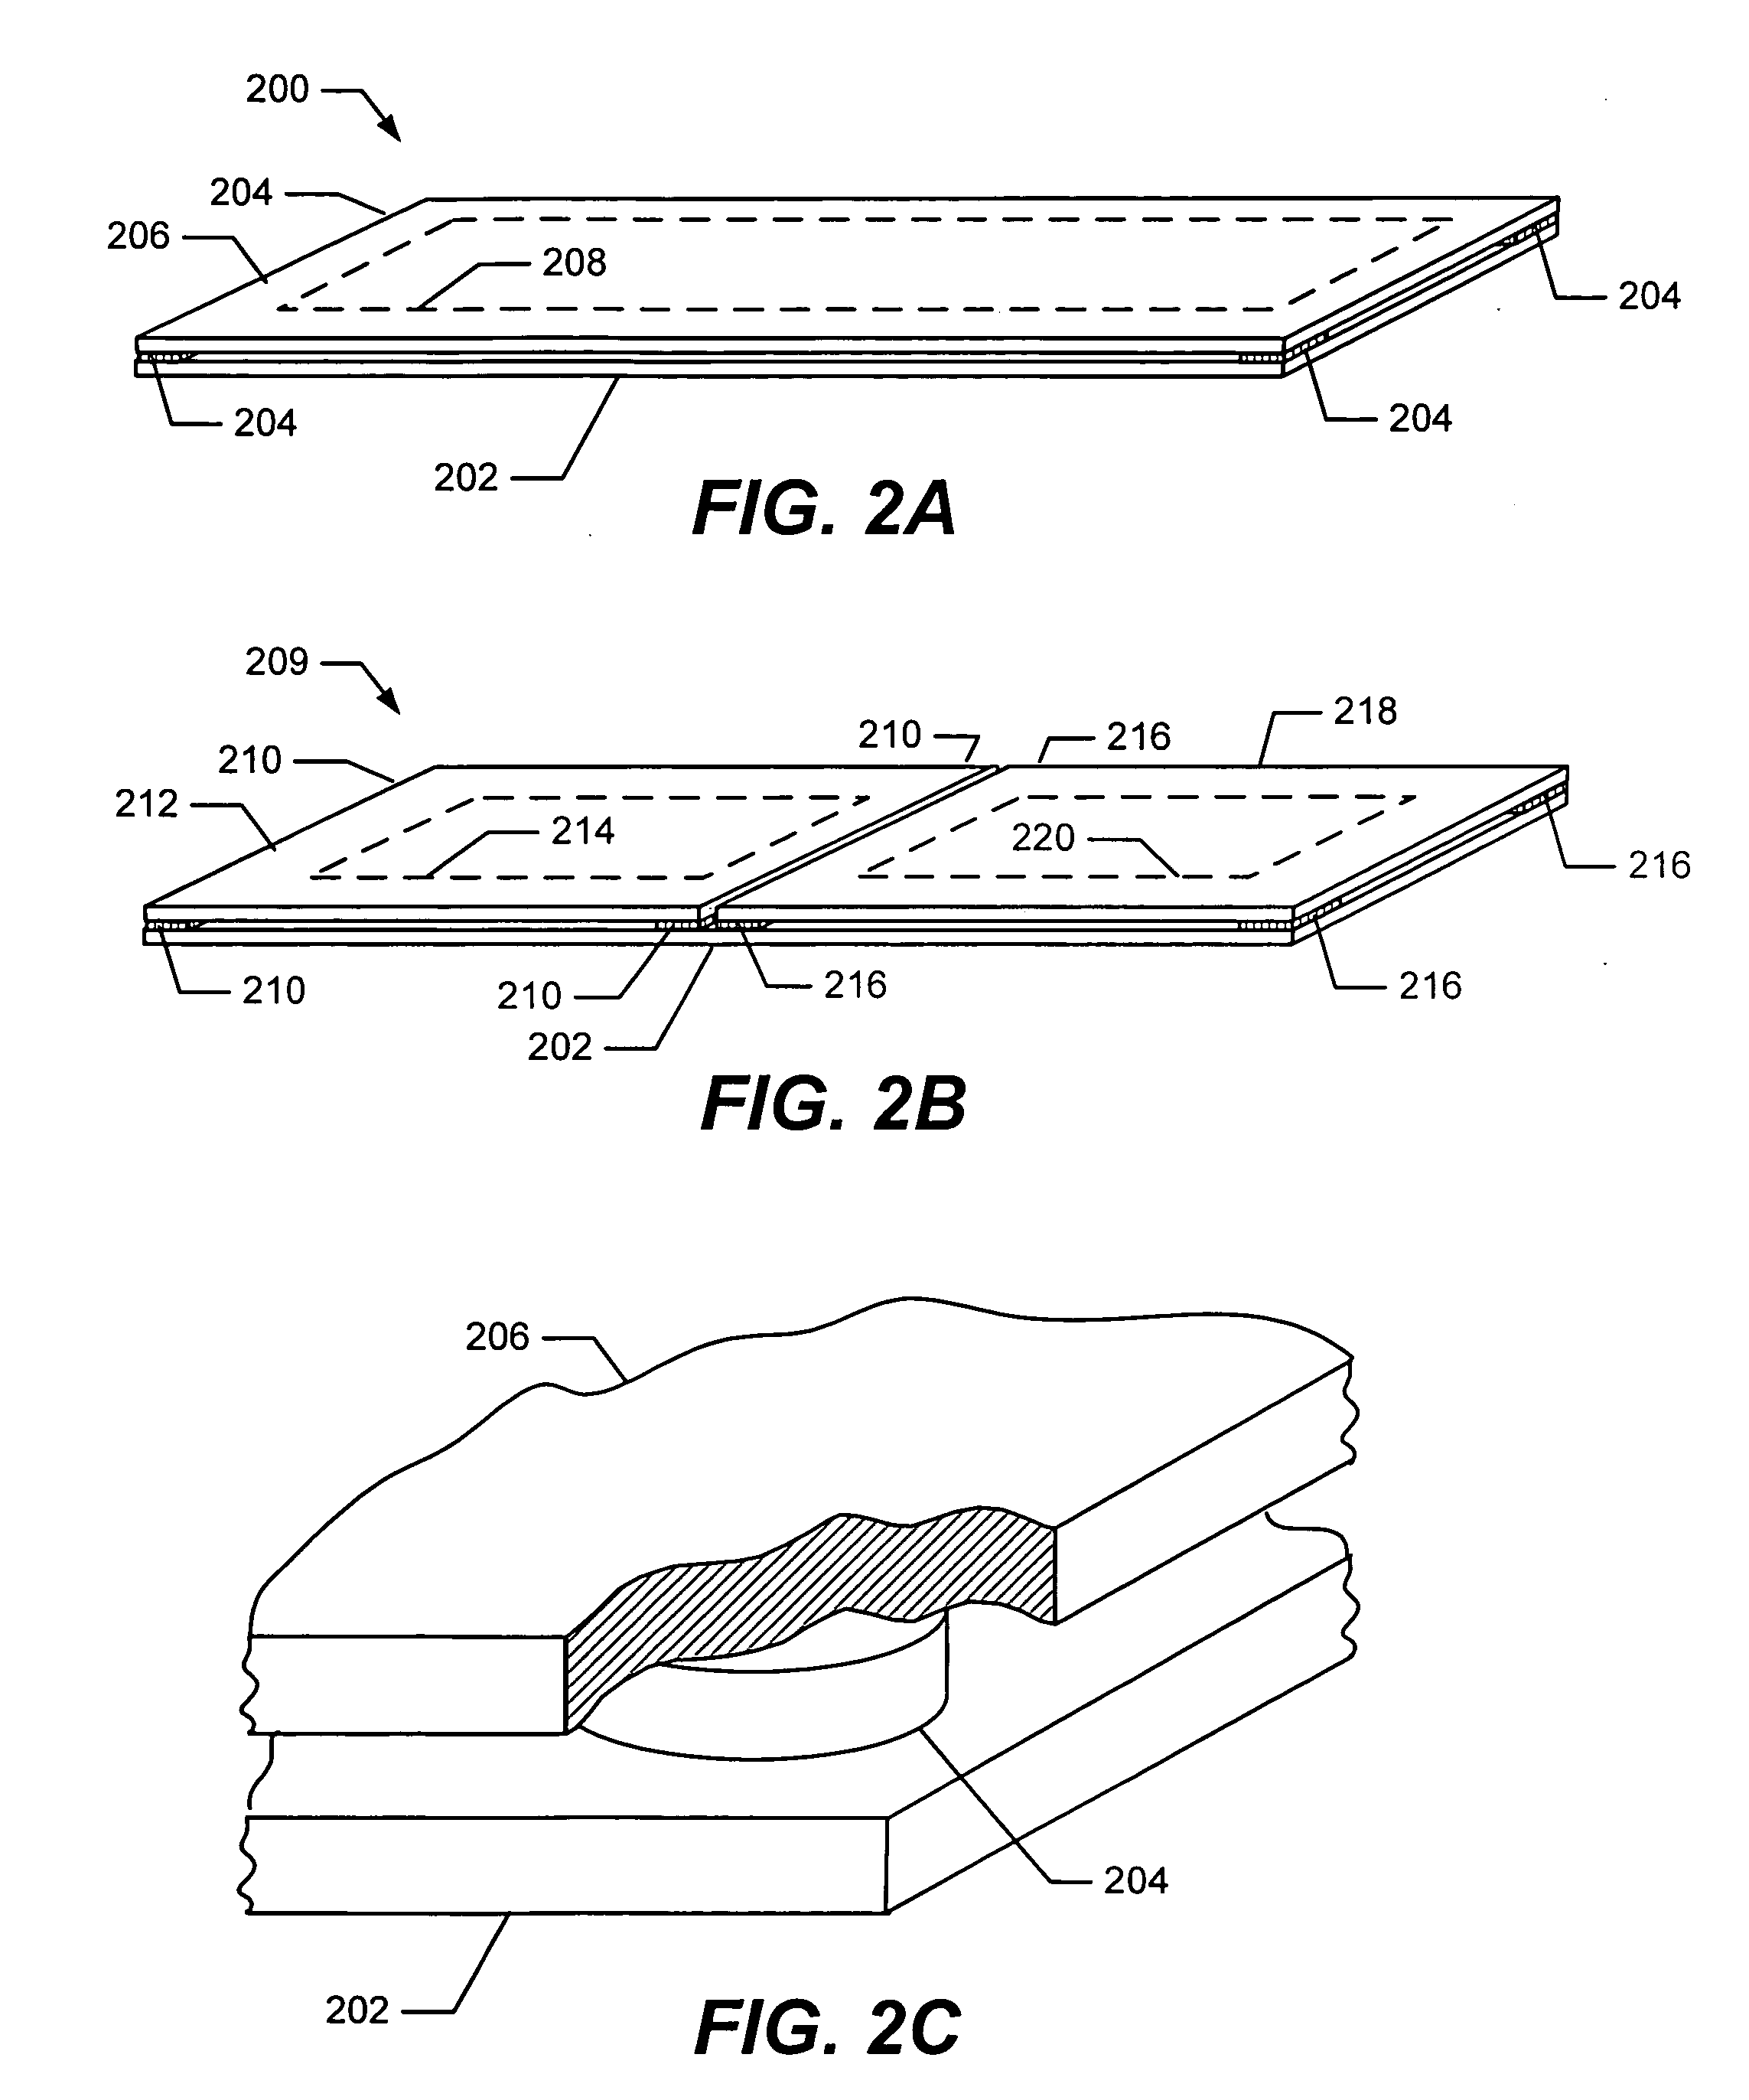 Load sensing inventory tracking method and system